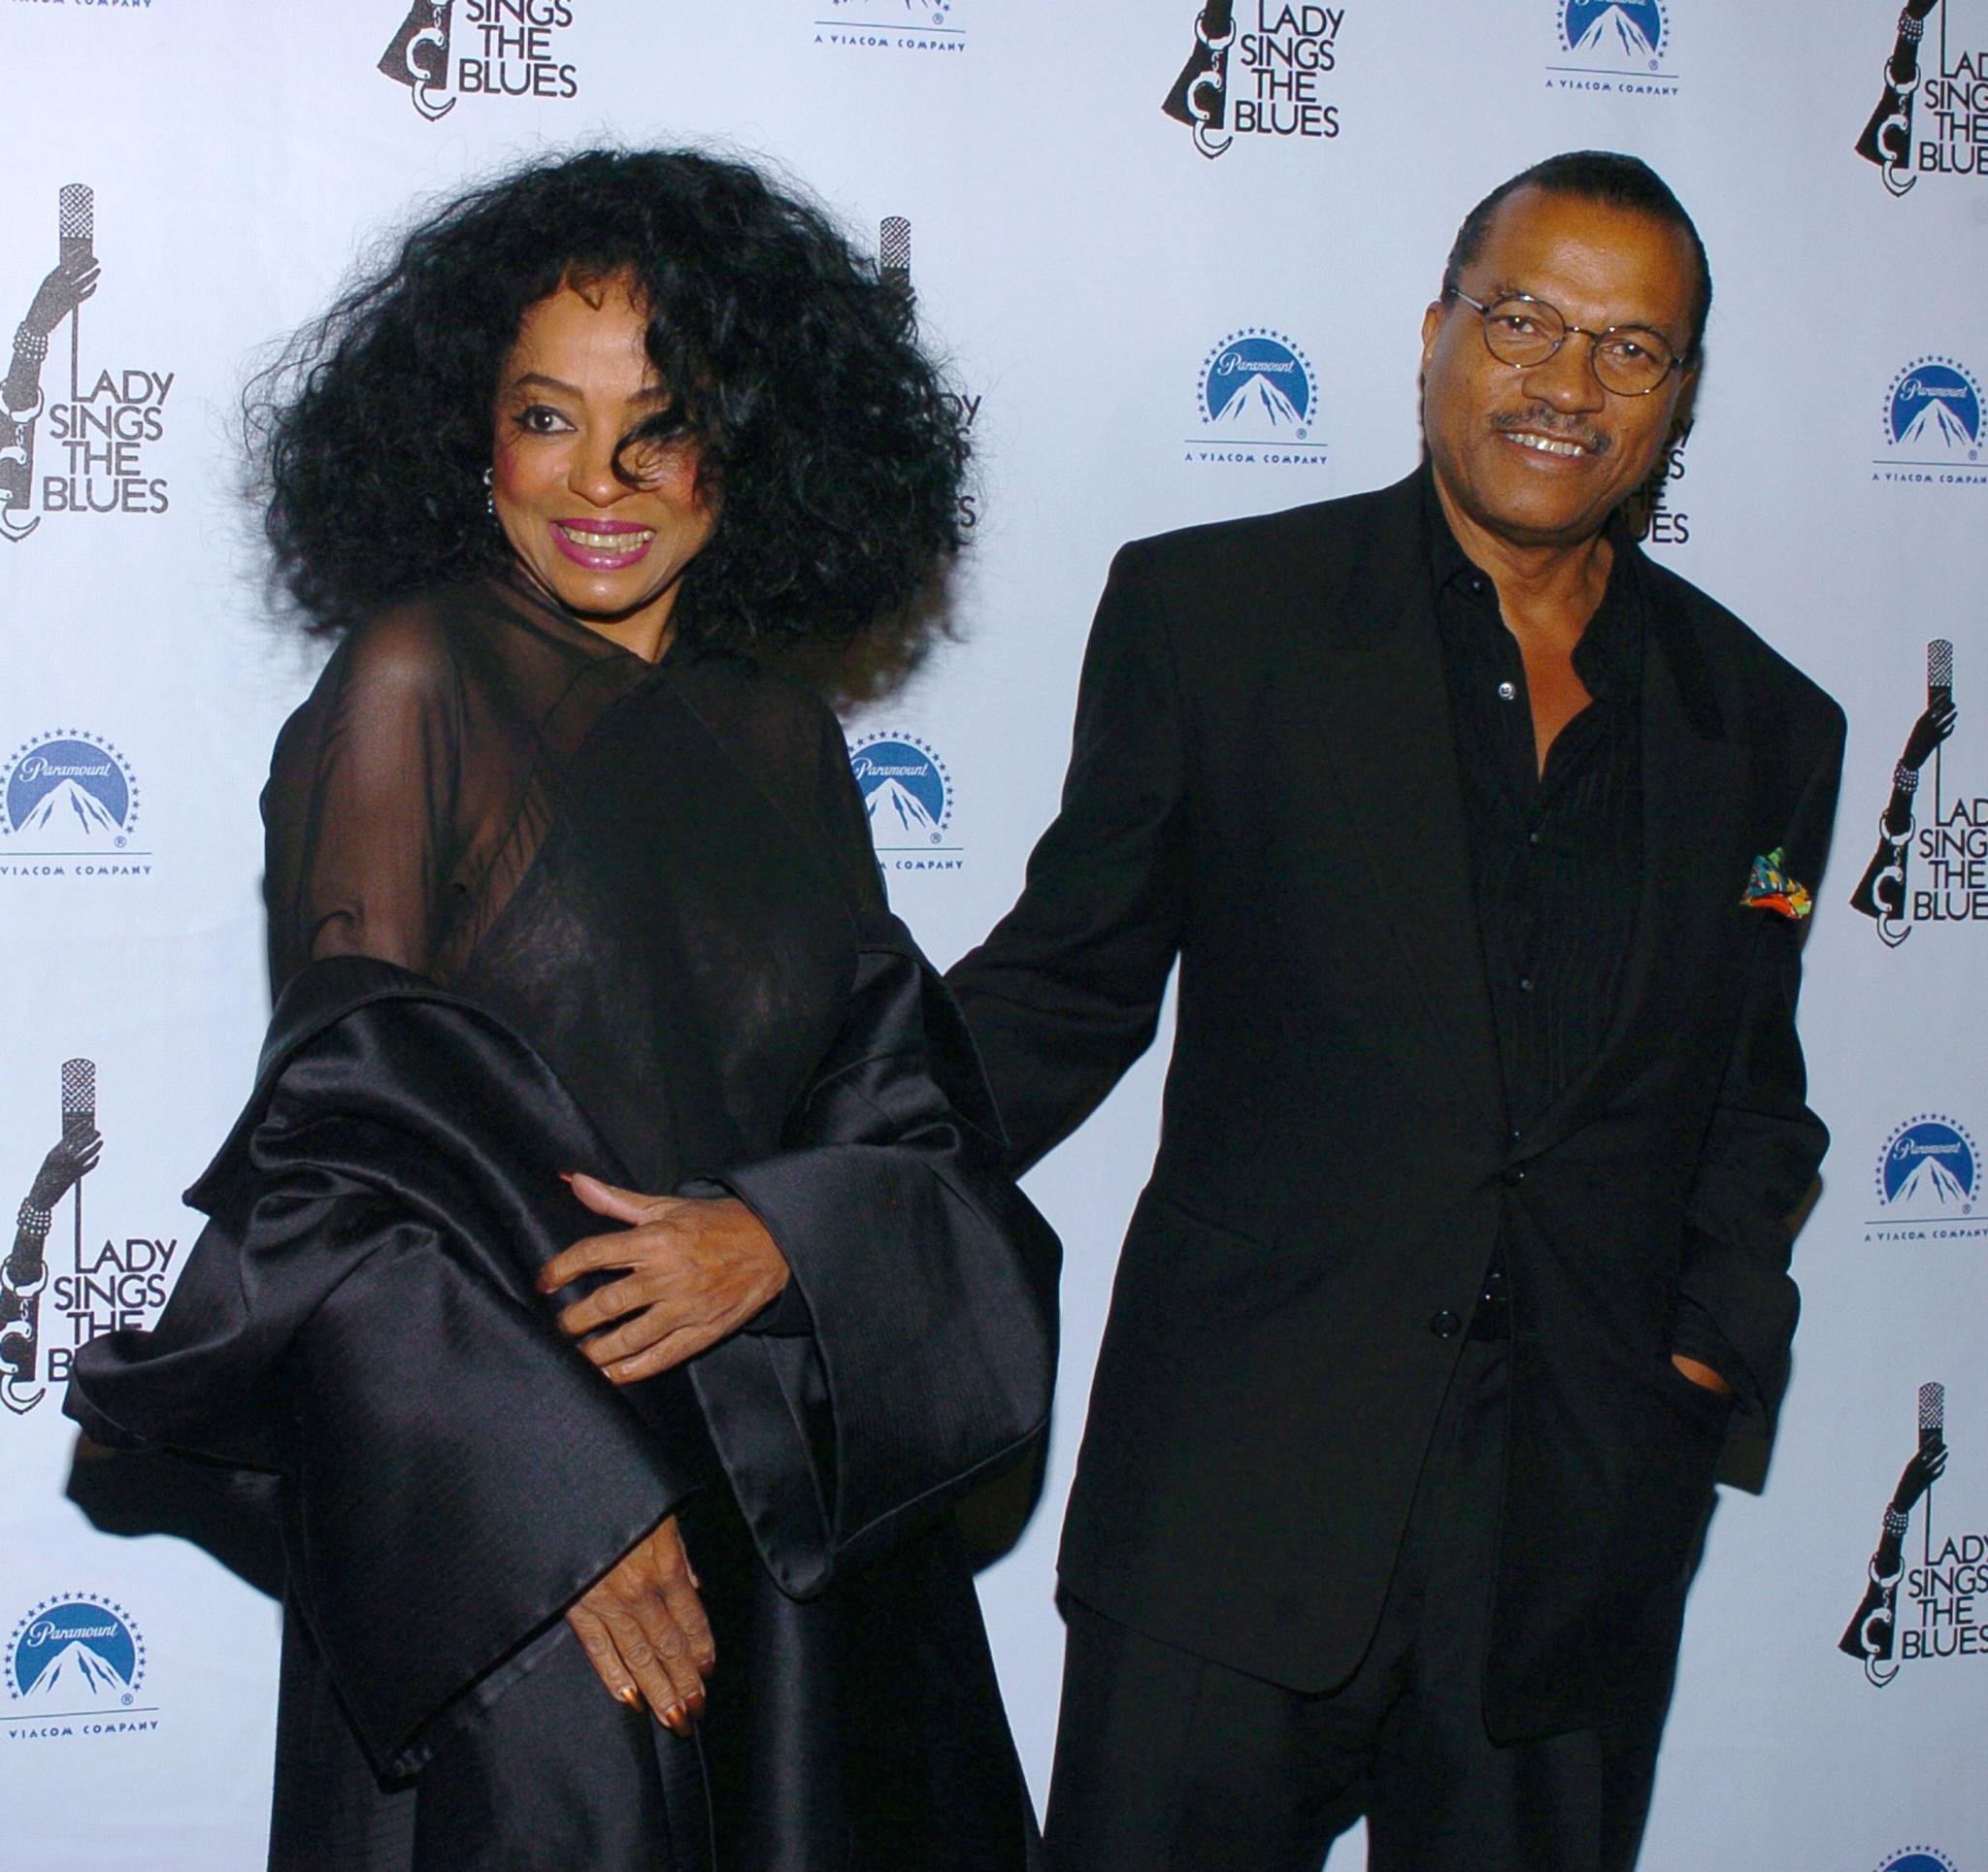 Coffee Talk:Taraji P. Henson Wants Diana Ross and Billy Dee Williams to Play Her Parents on 'Empire'
